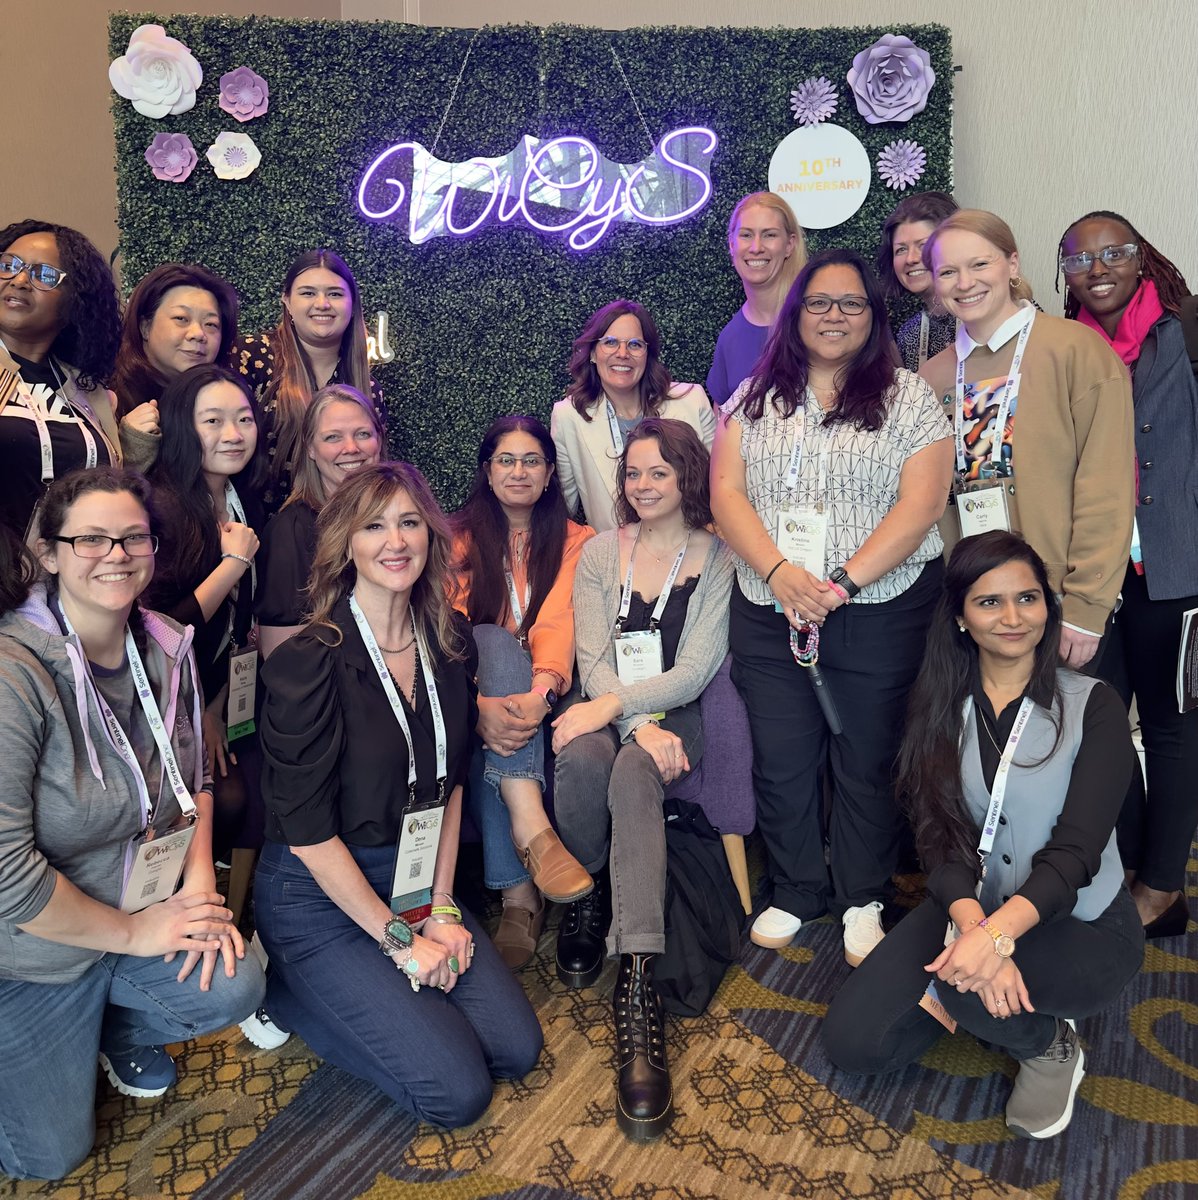 The #WiCyS2024 festivities going strong with some @wicysWW leaders together. Thanks @SecureDena for the awesome photo w/you ladies! #womenincybersecurity